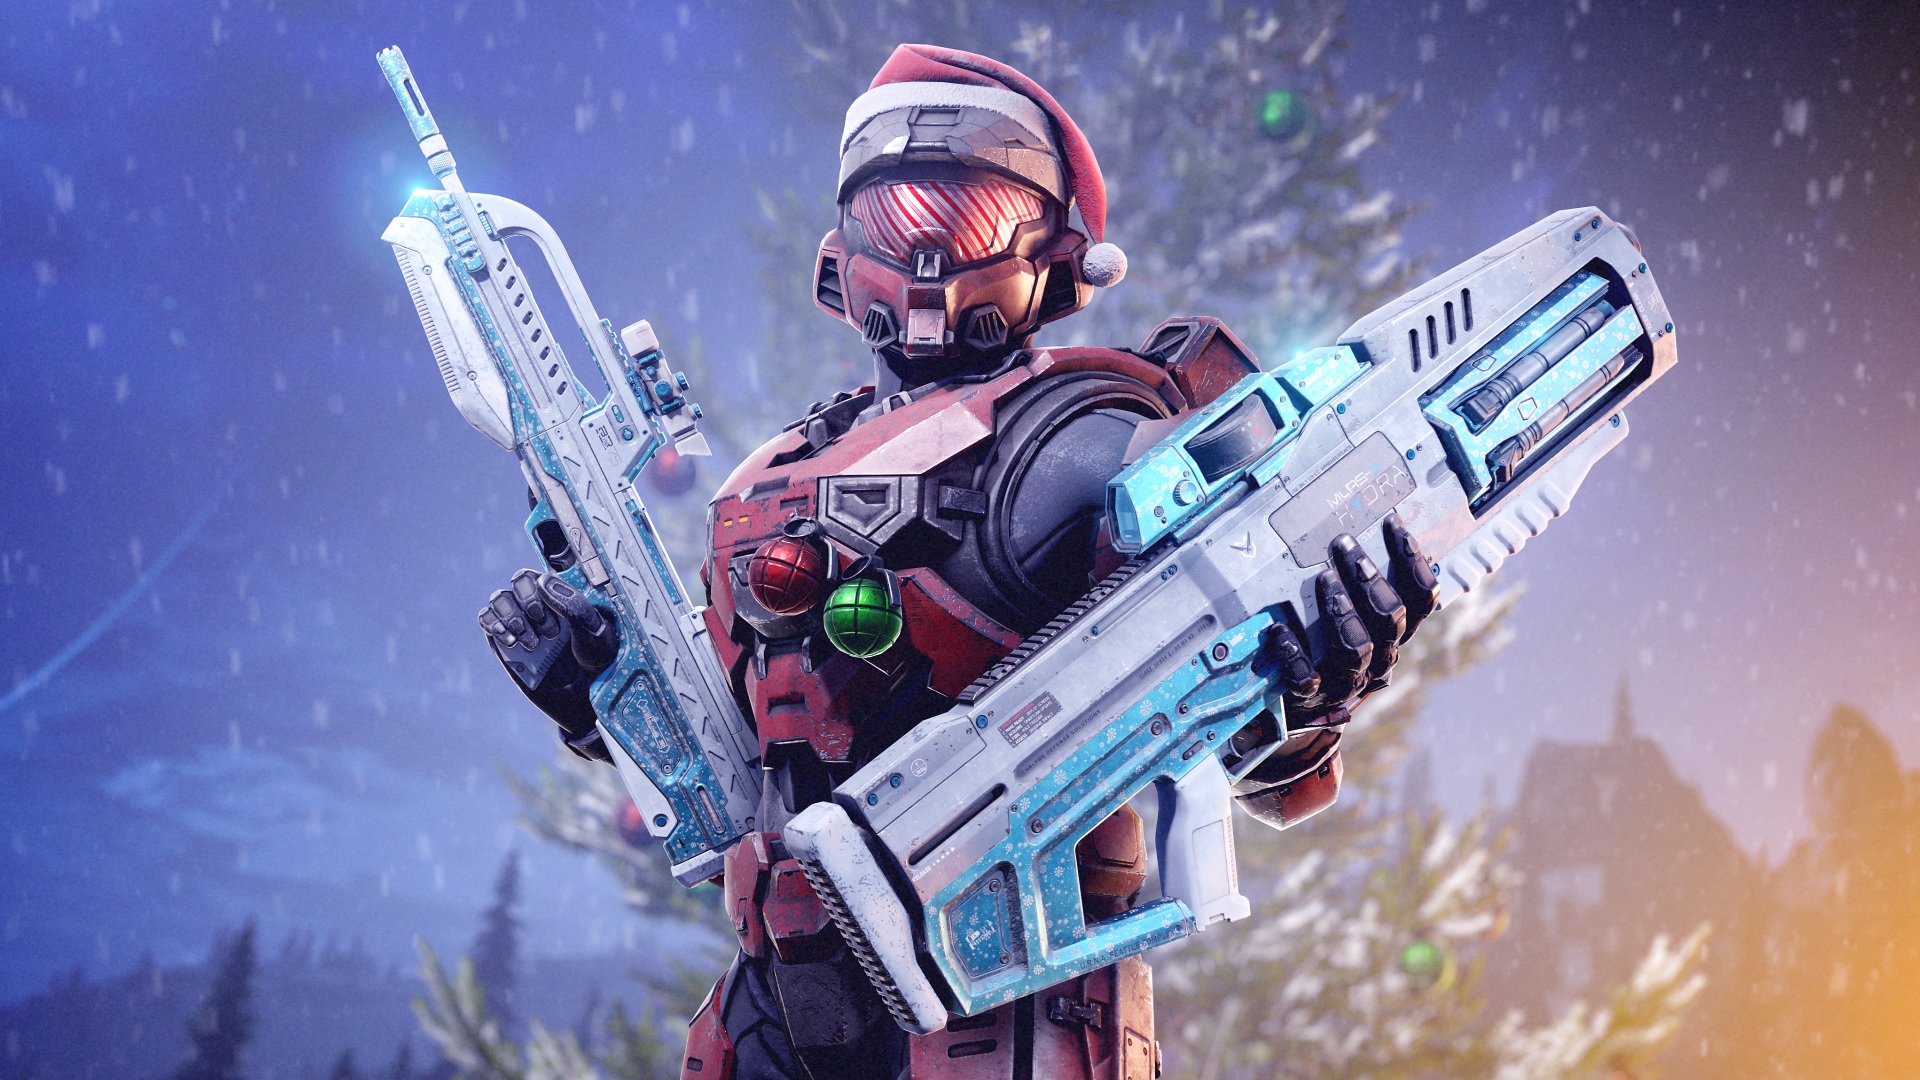 Header image for the Winter Contingency II event showing a red-colored Spartan with a nightcap holding a Battle Rifle and Hydra with Holiday-themed coatings